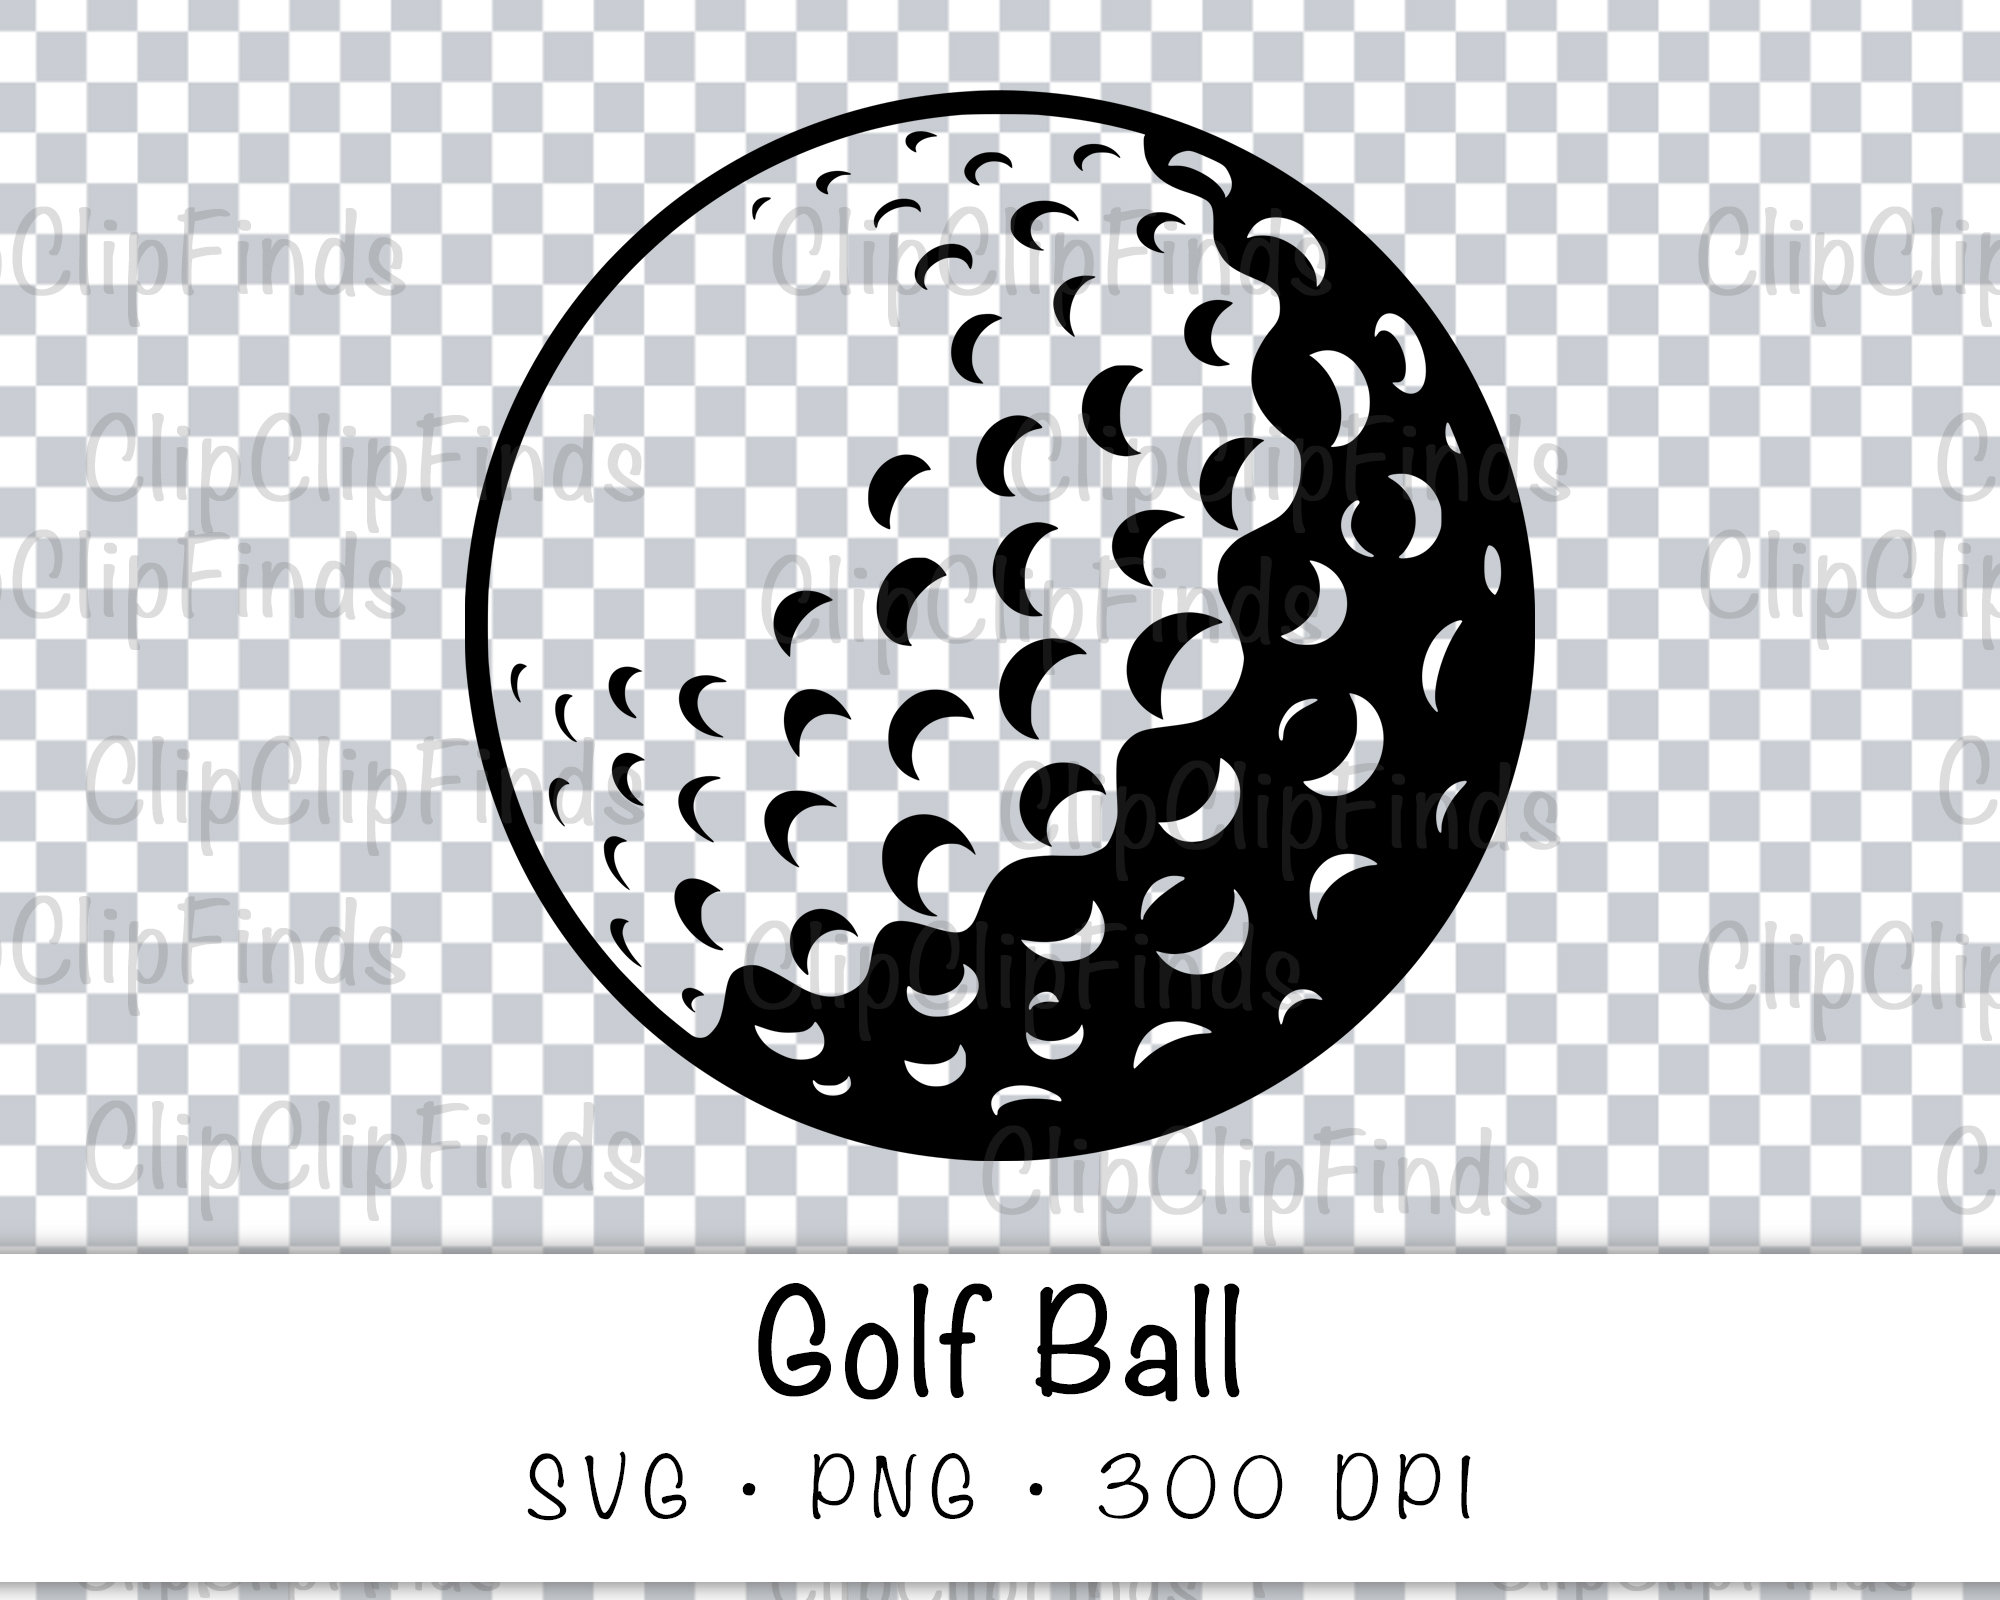 Golf Ball 6 Svg Golf Ball Svg Golf Svg Golf Ball Clipart Etsy | Images ...